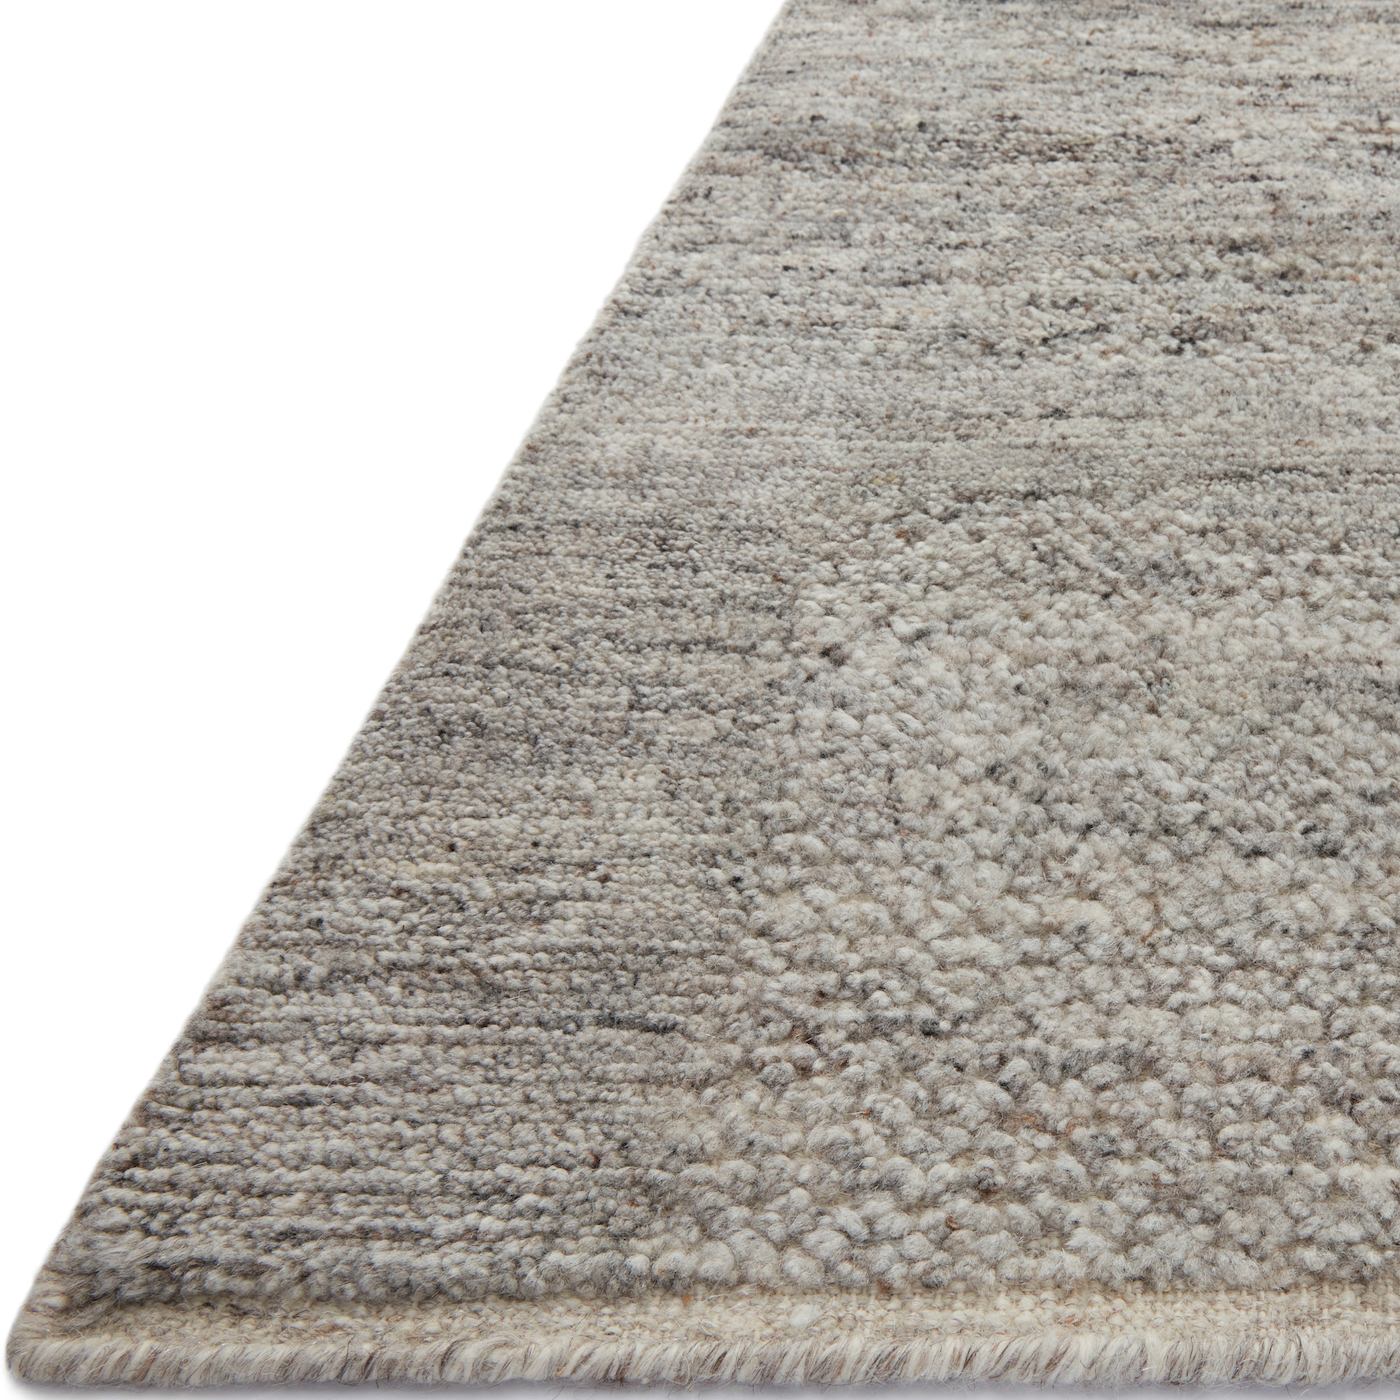 The Collins Amber Lewis x Loloi COI-03 AL Pebble / Silver rug for Amber Lewis x Loloi is hand-knotted of wool and cotton by skilled artisans in India and GoodWeave-Certified. Collins features varying knotting techniques interwoven to create a uniquely texture pattern. Amethyst Home provides interior design, new construction, custom furniture, and rugs for the Omaha and Lincoln, Nebraska metro area.